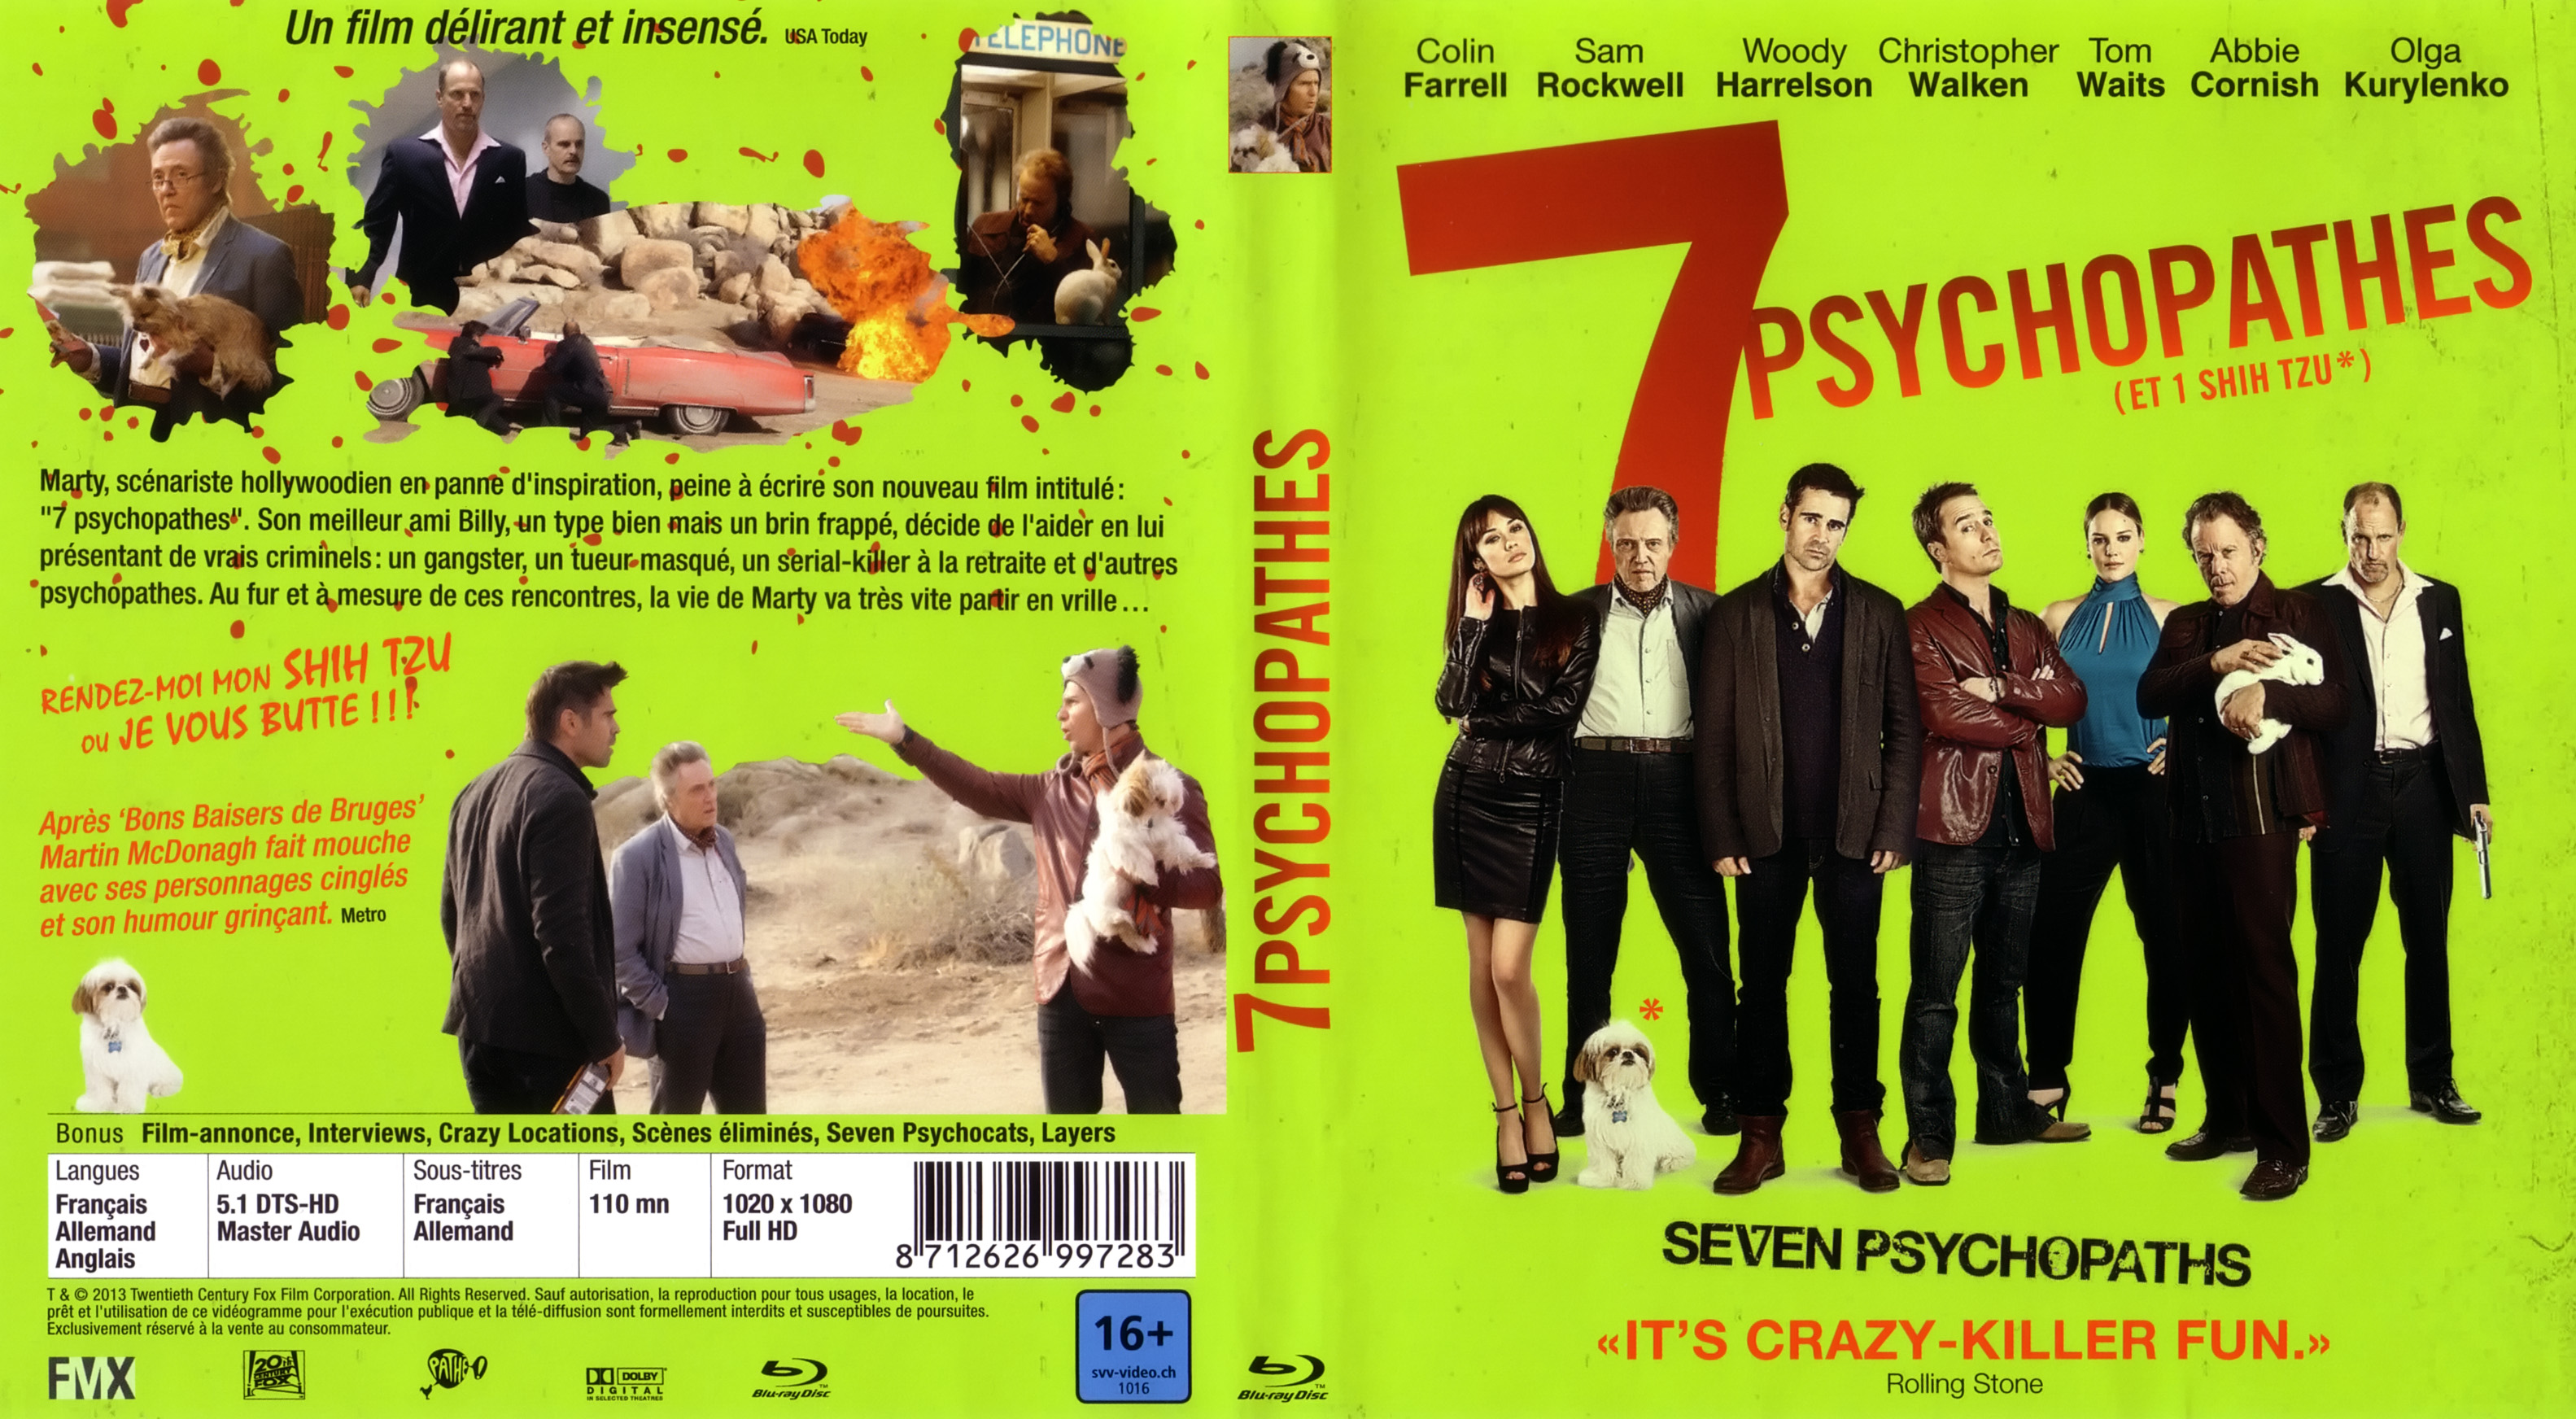 Jaquette DVD 7 Psychopathes (BLU-RAY) v2